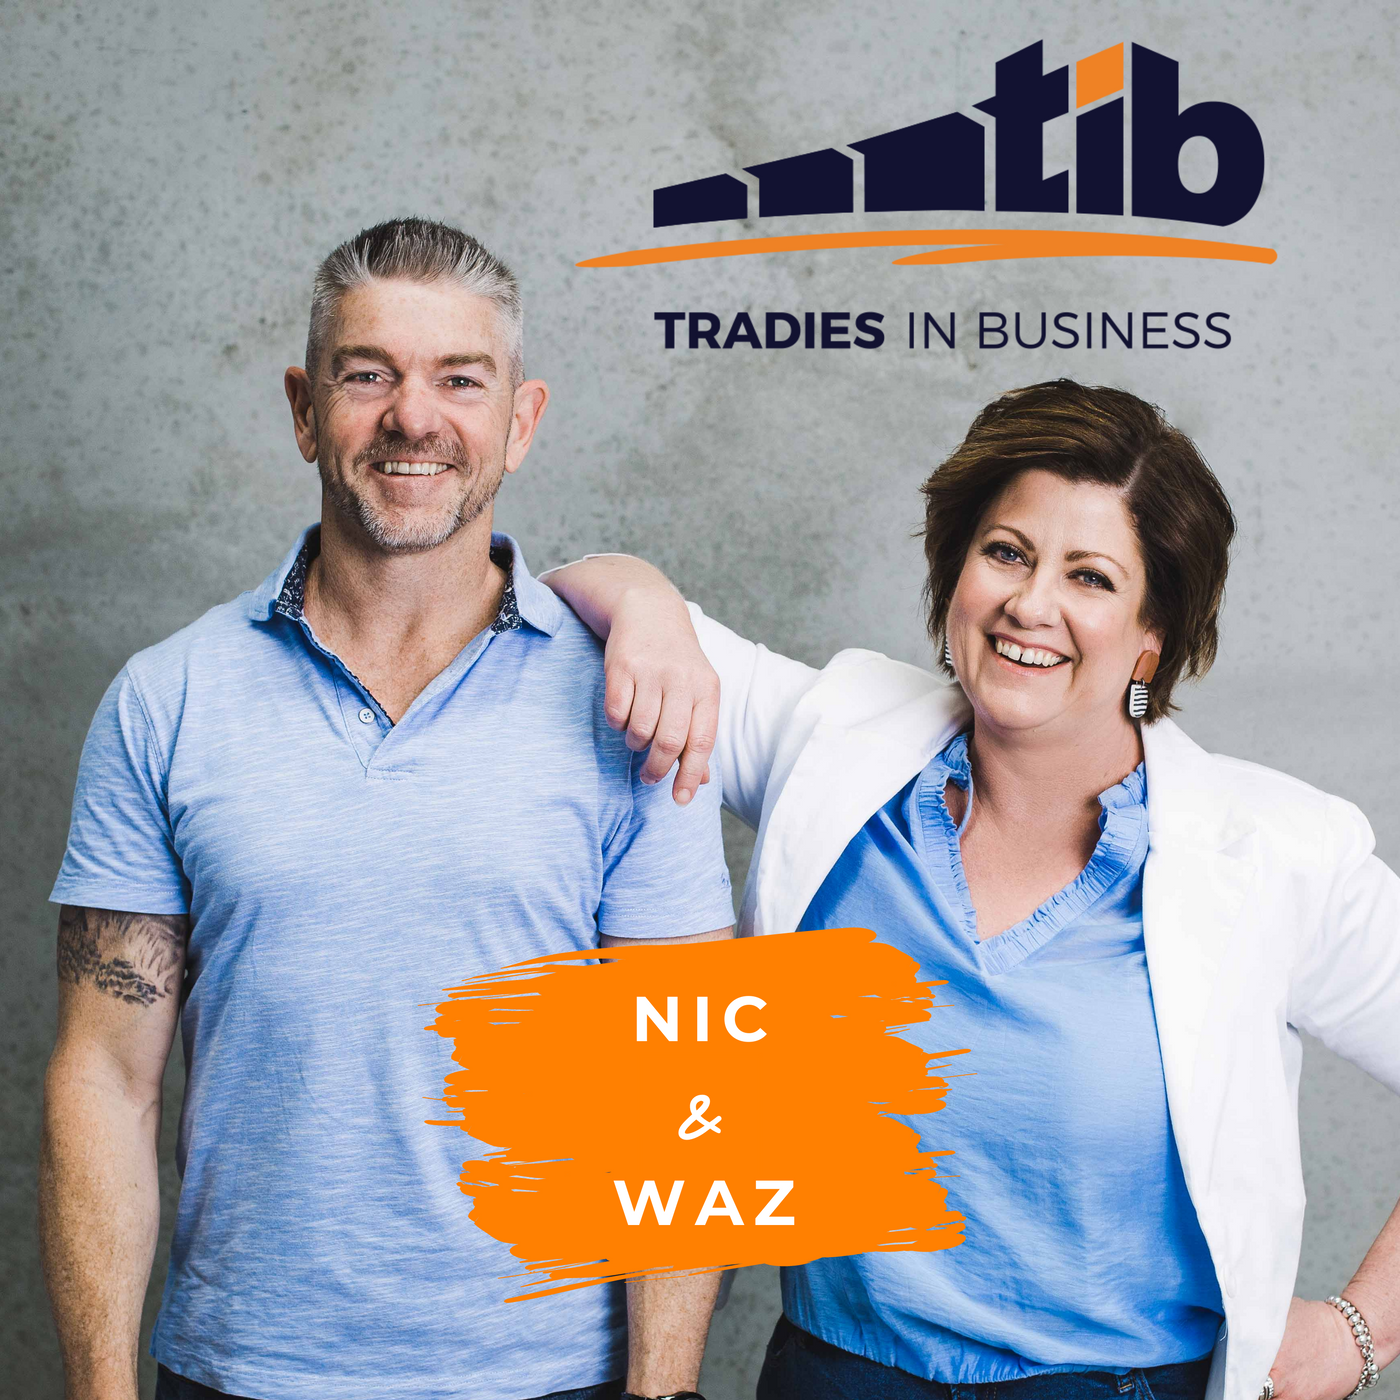 TIB597 AWARDS SPECIAL - How A Surprise Nomination Has Changed This Tradie's Business